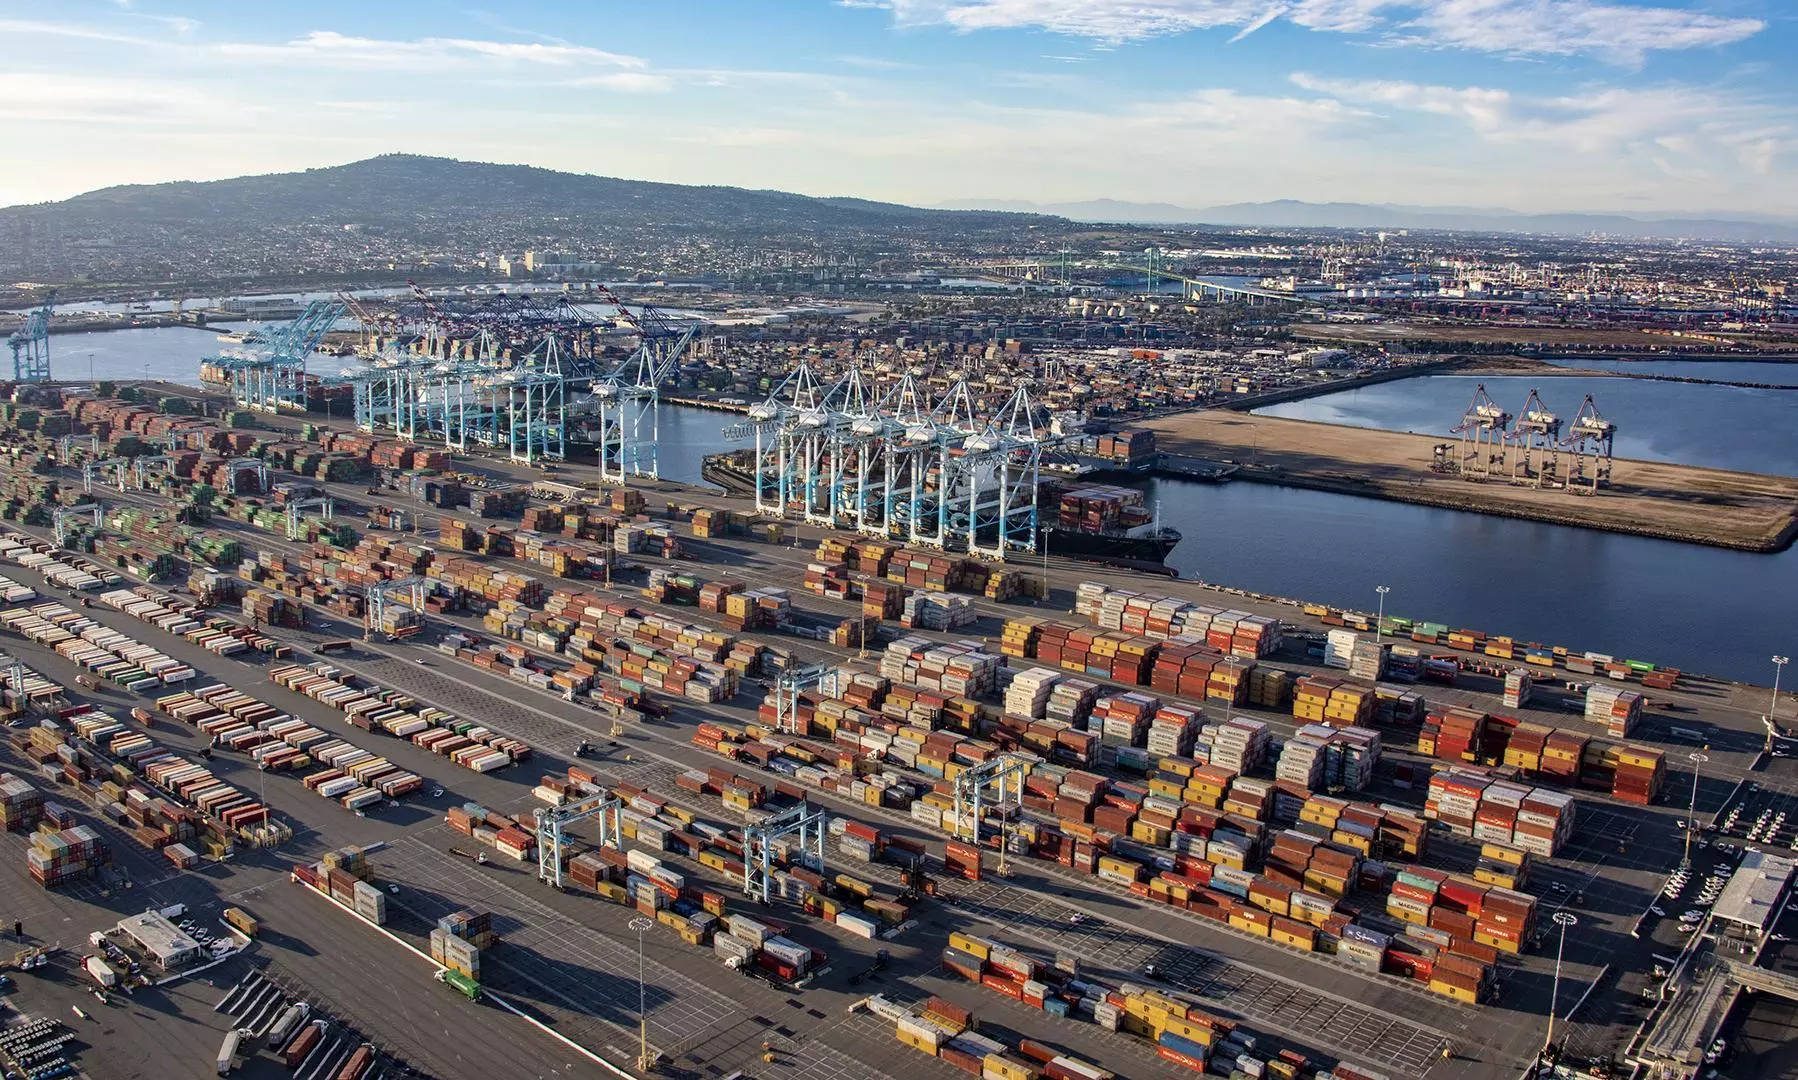 As many as 43 container ships were backed up across the West Coast ports of Los Angeles/Long Beach as on March 30, 2022. (Image Credit: Port of Los Angeles)